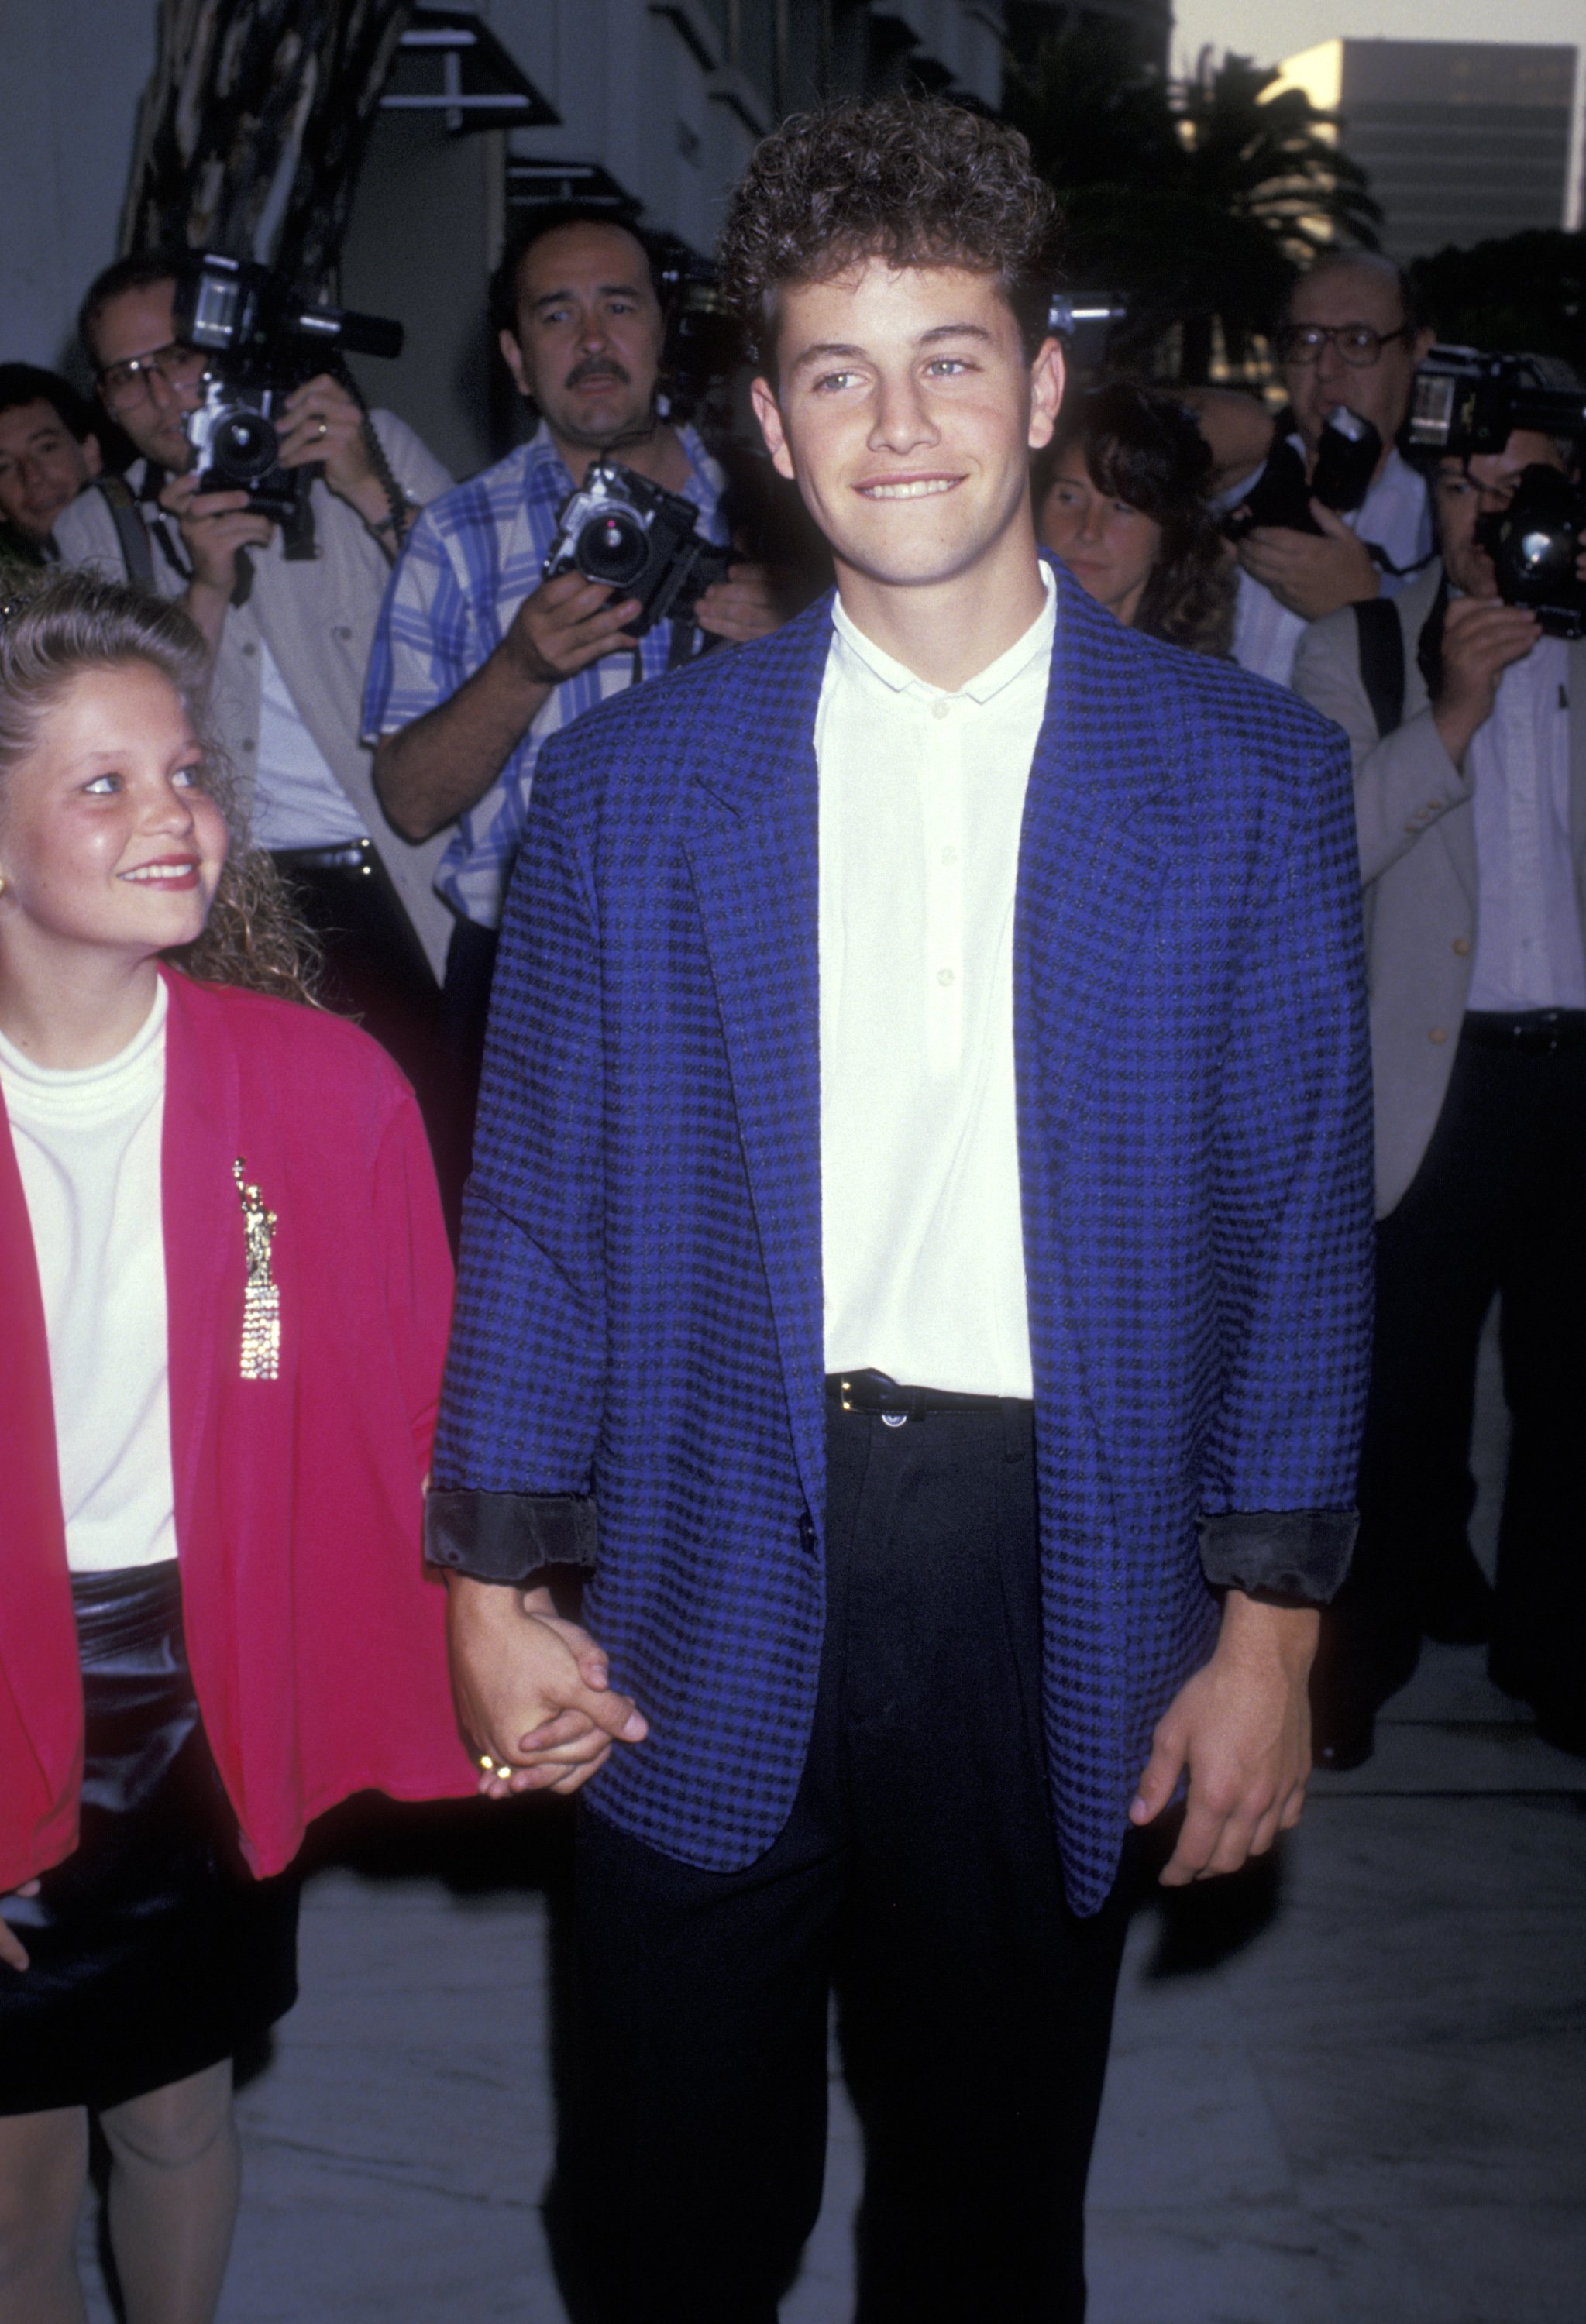 Candace Cameron Bure and Kirk Cameron attend ABC Affiliates Party on June 14, 1989 in California | Source: Getty Images 